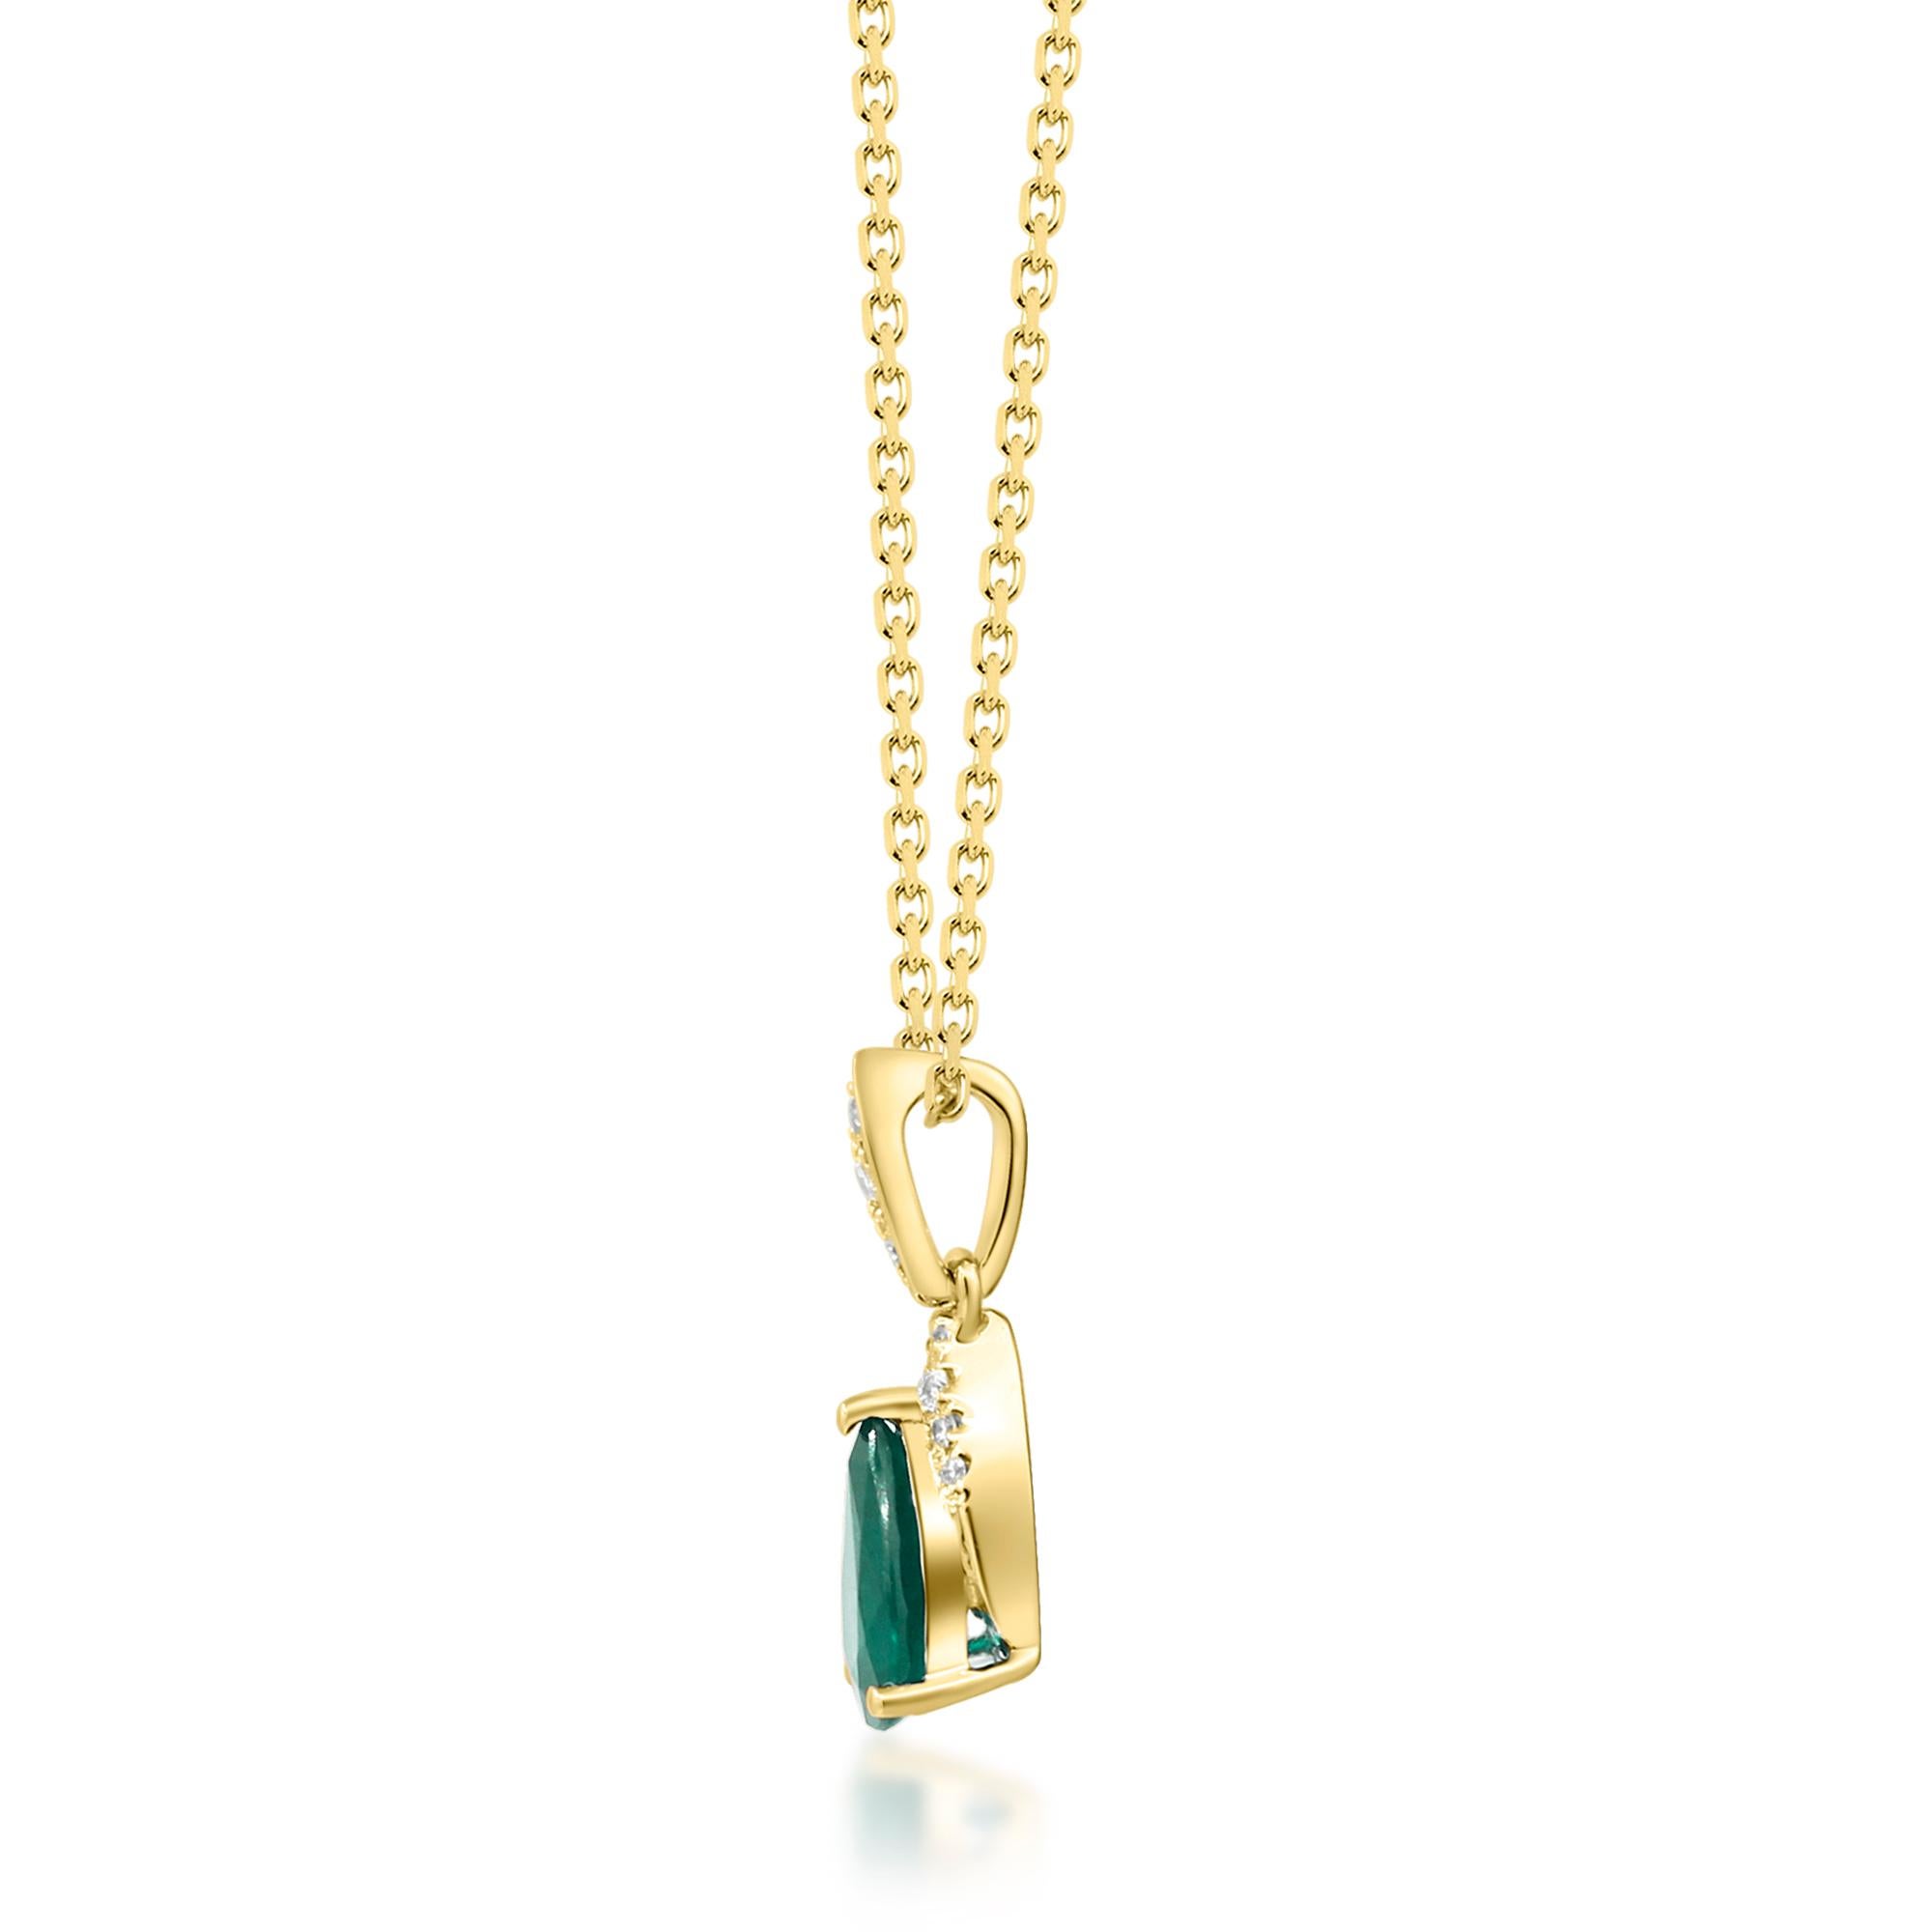 Pear Cut 0.64 Carat Pear-Cut Emerald with Diamond Accents 10K Yellow Gold Pendant For Sale